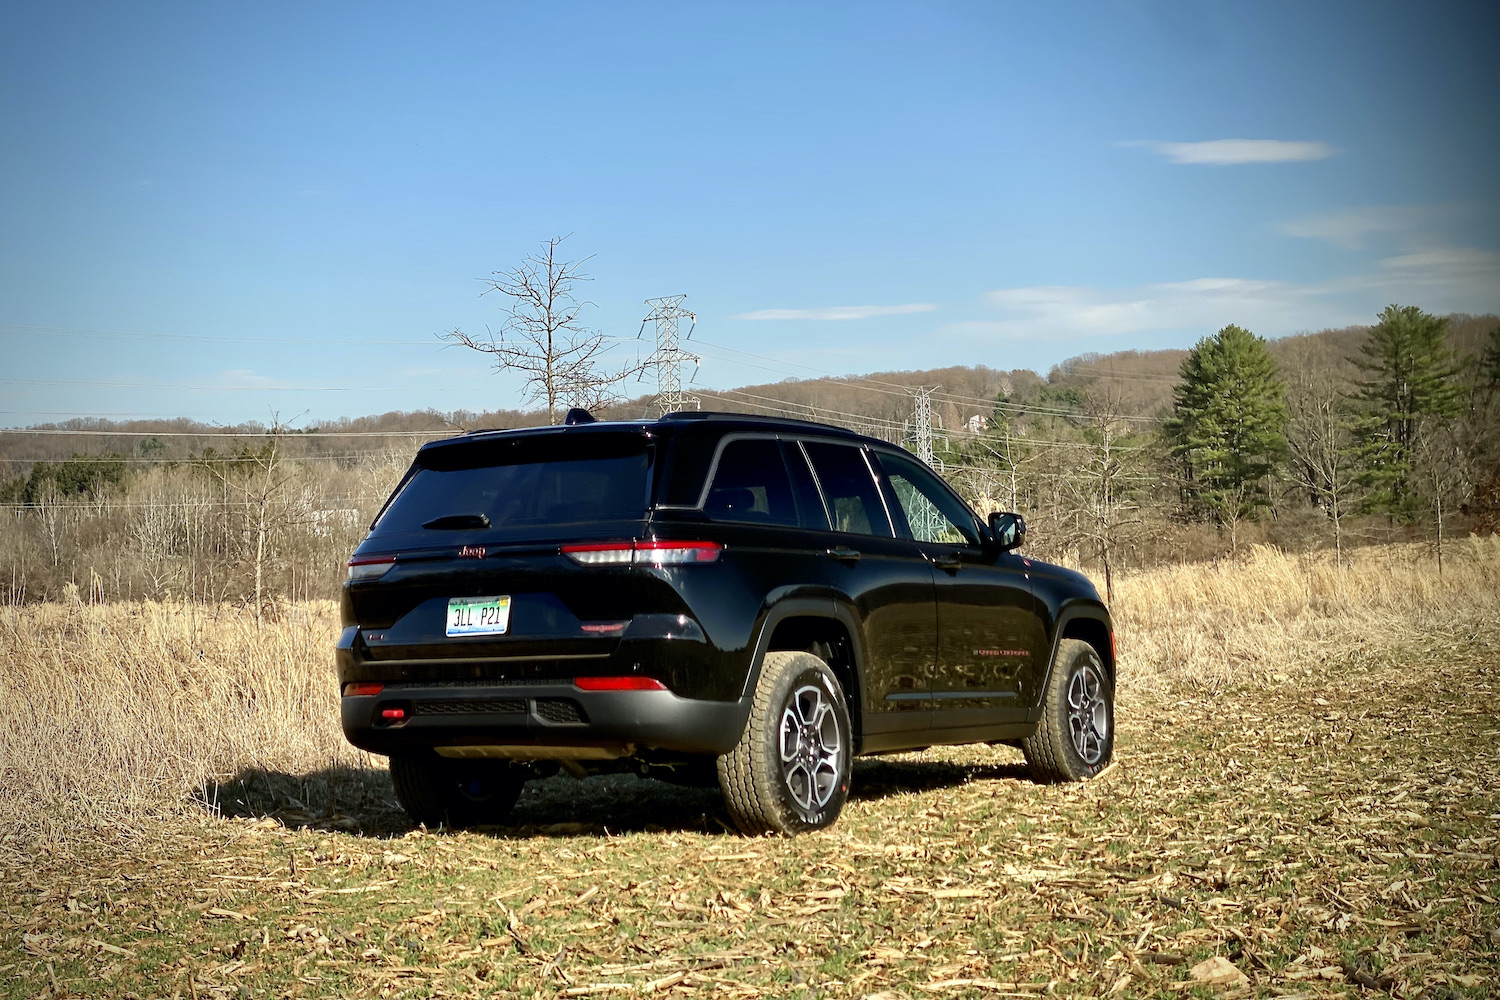 Rear view of the 2022 Jeep Grand Cherokee Trailhawk in a grassy field in front of bushes.